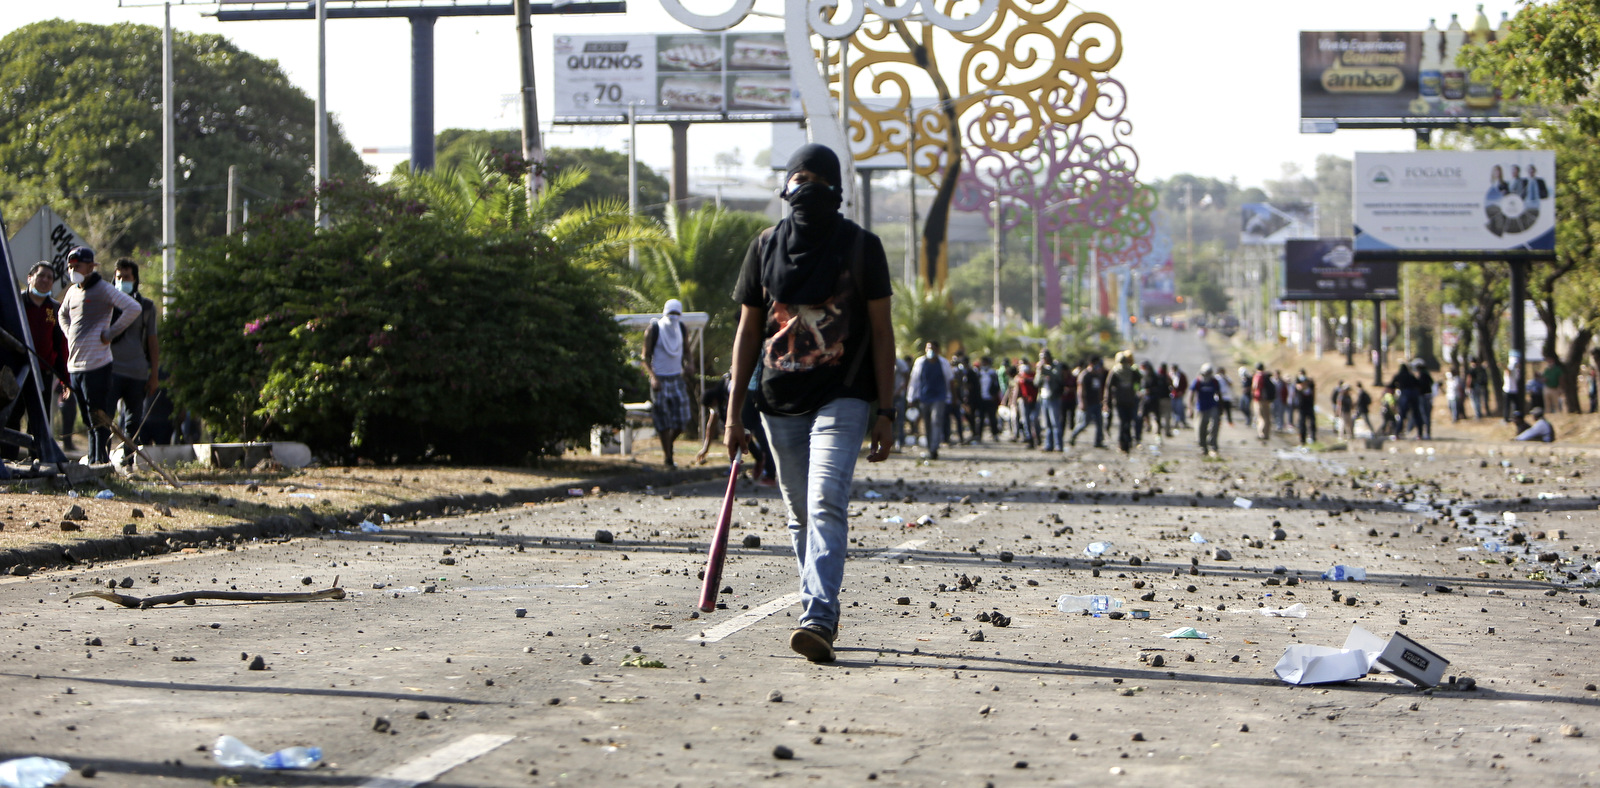 A masked protester walks along a main avenue, littered with debris, in Managua, Nicaragua, Friday, April 20, 2018. Three consecutive days of protests in Nicaragua after the announcement of controversial Social Security reforms added a fifth death and dozens of injured Friday. International organizations have shown concern and have called on the government of Daniel Ortega to respect the voice of the people. (AP Photo/Alfredo Zuniga)